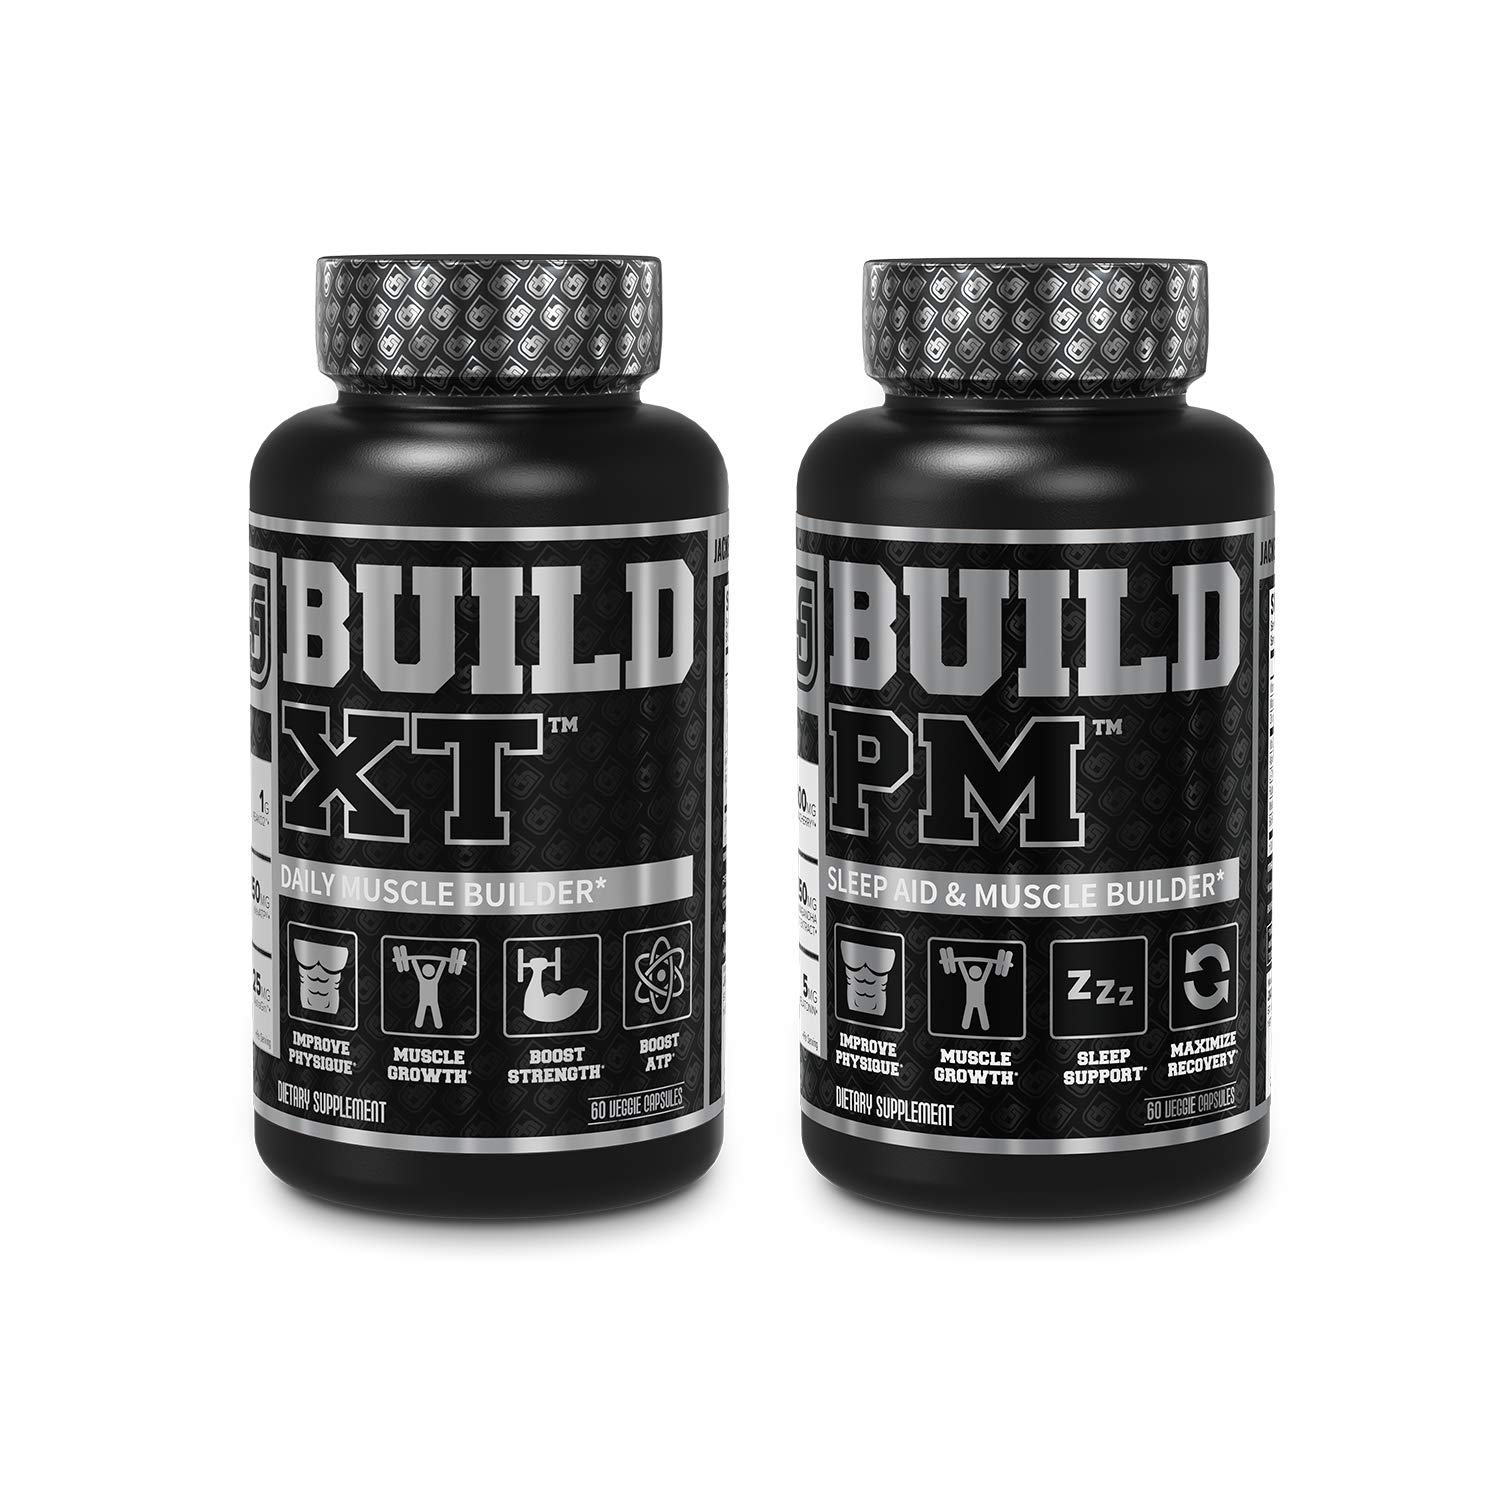 Jacked Factory AM & PM Muscle Building Supplement Stack - Build-XT Muscle Builder & Build PM Night Time Muscle Growth & Sleep Aid